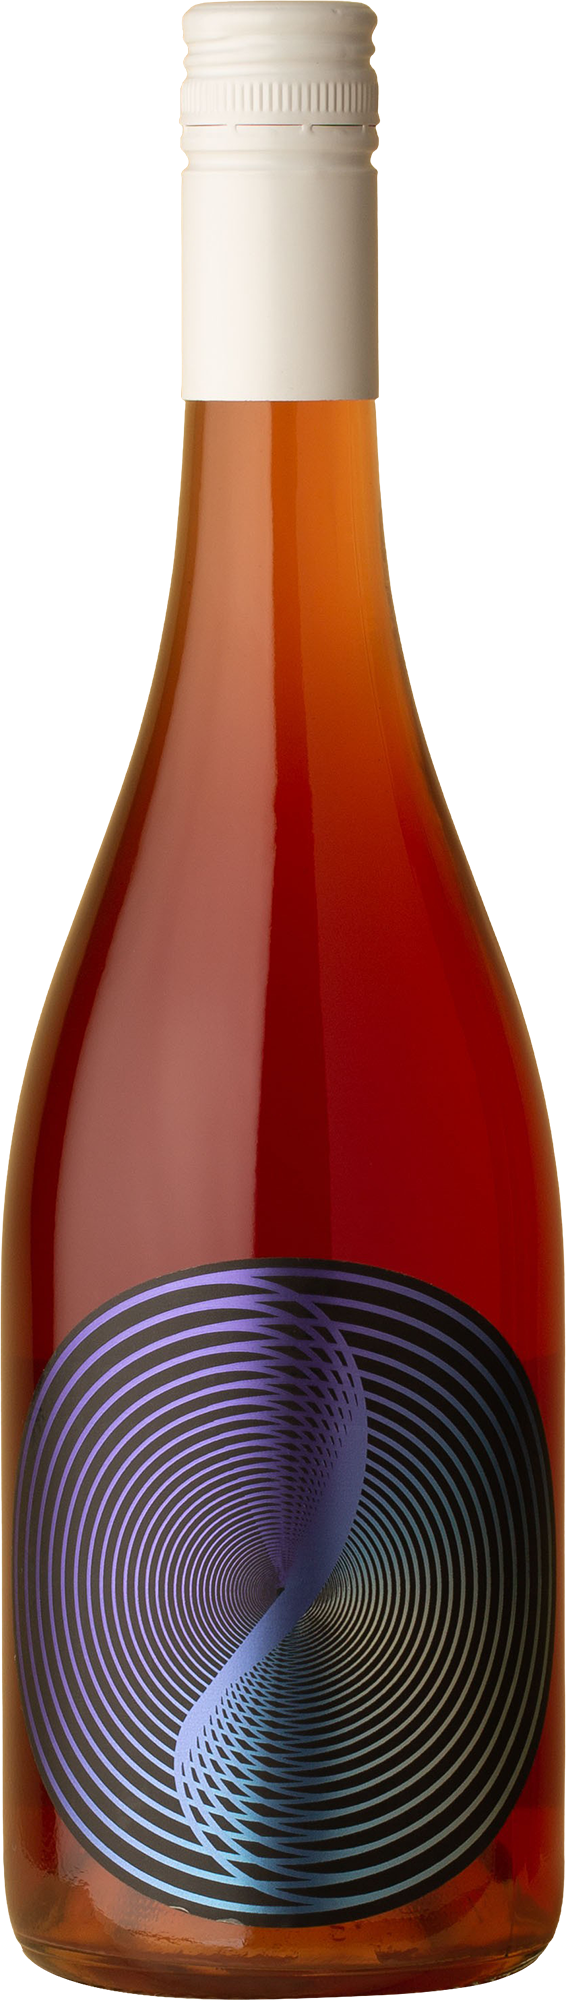 Aller Trop Loin - Higher State of Consciousness Pinot Gris 2021 Orange Wine